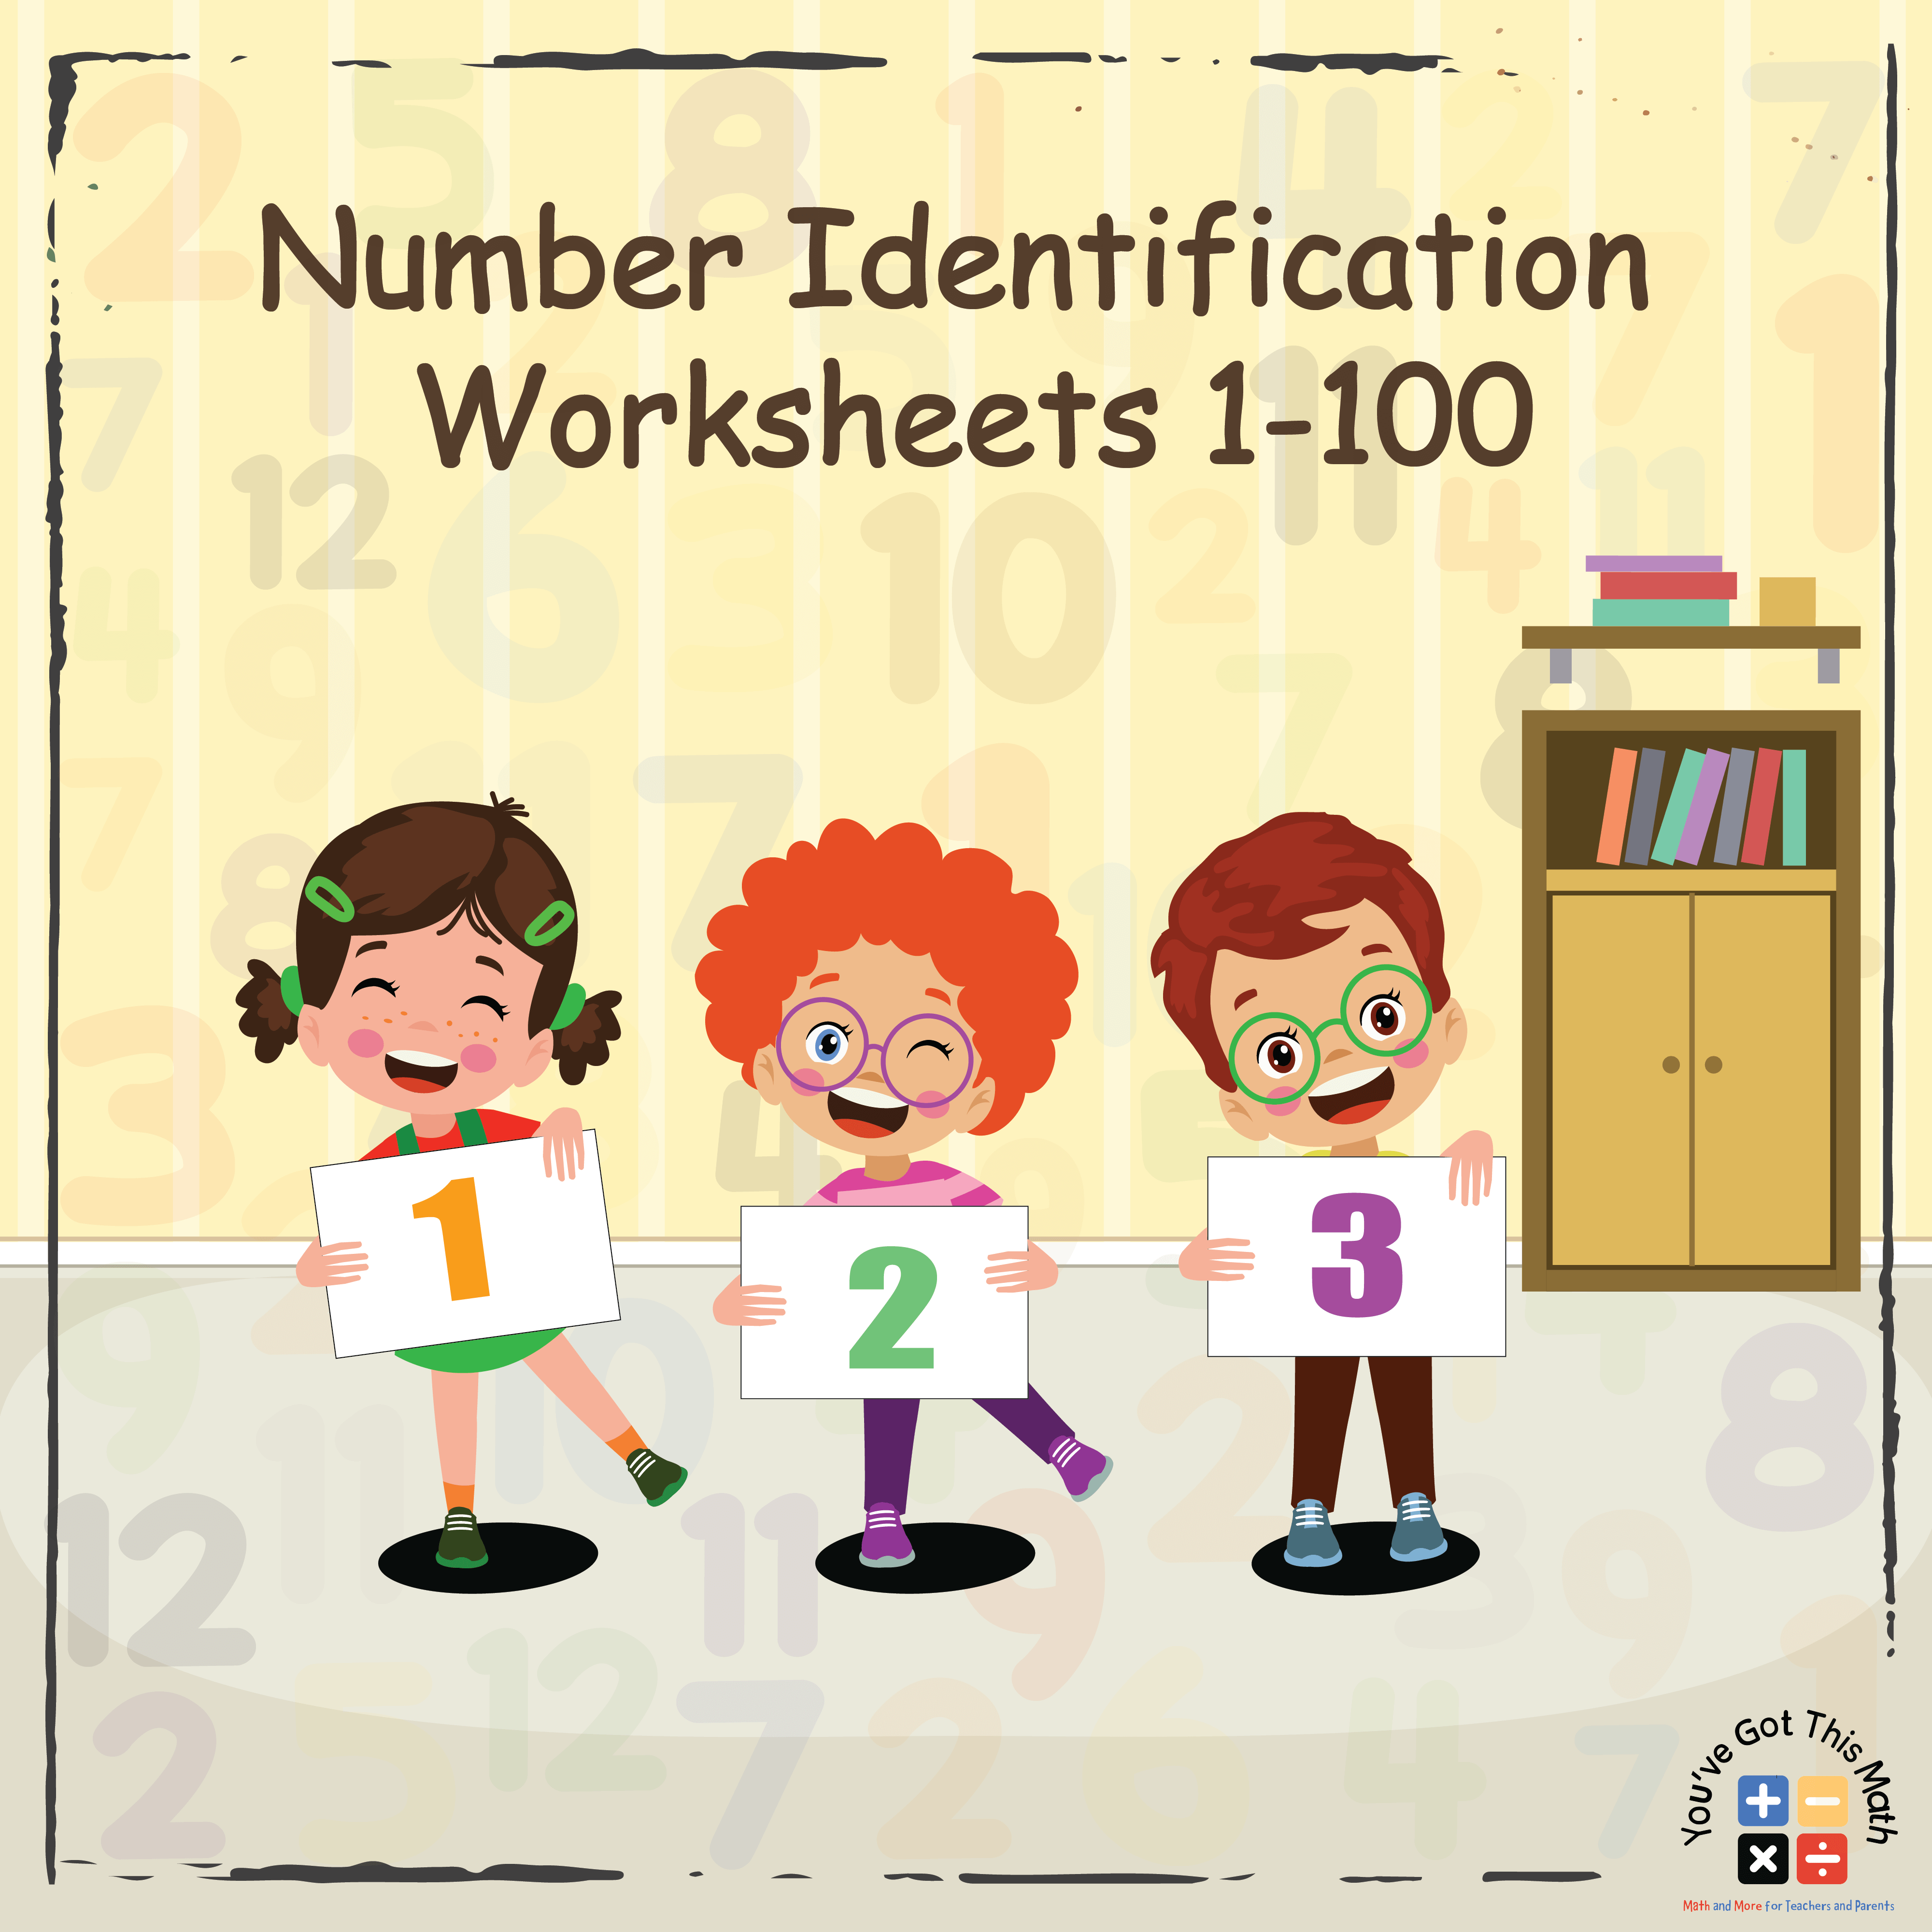 Feature image of Number Identification Worksheets 1-100